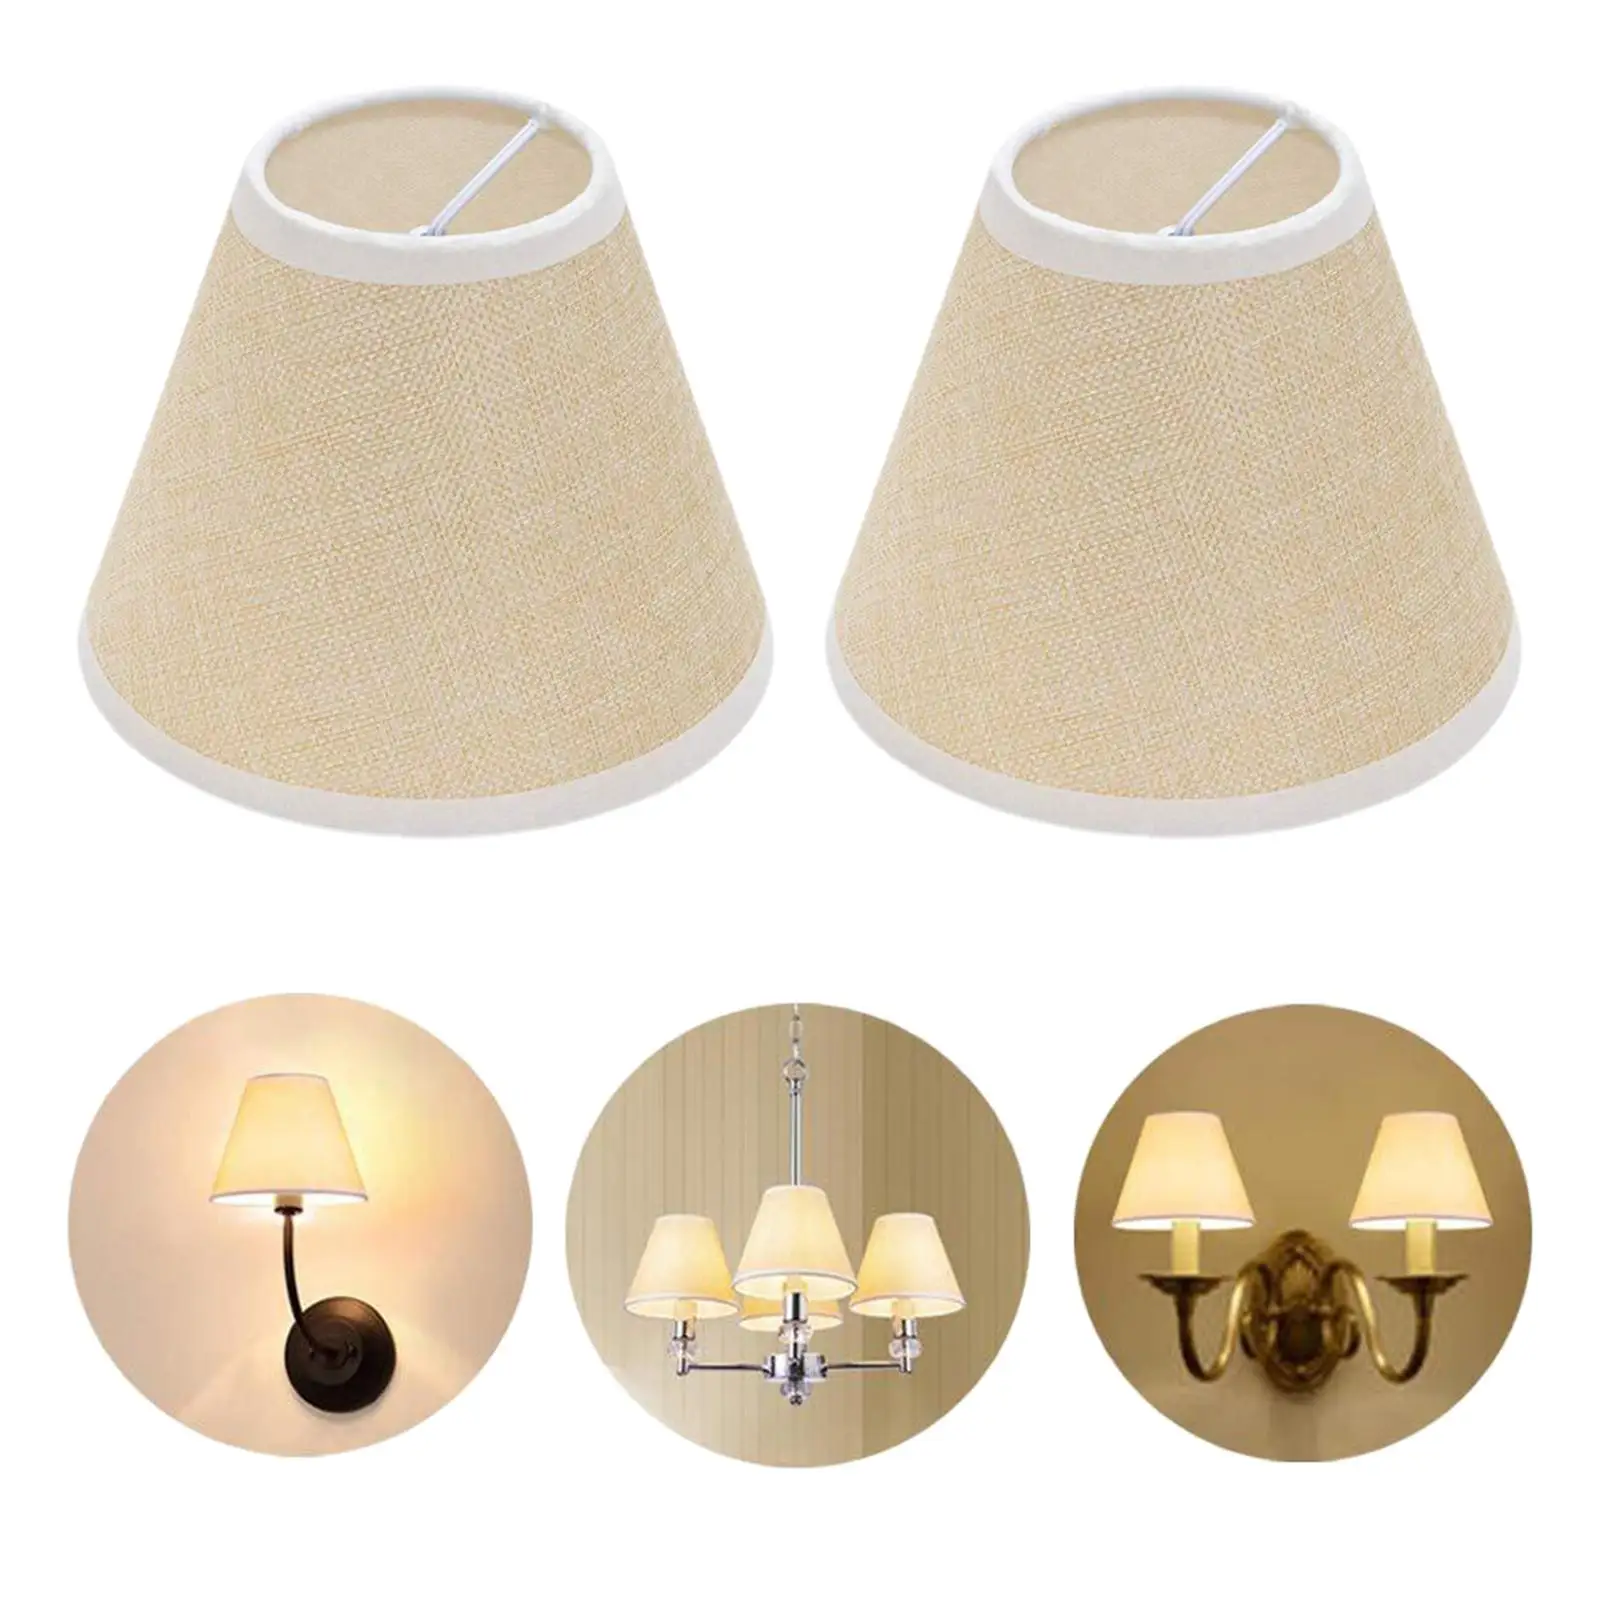 2 Pieces Rustic Lamp Shade Cloth Lamp Dust Cover Decorative Lampshade for Lighting Fixtures Living Room Table Light Bedroom